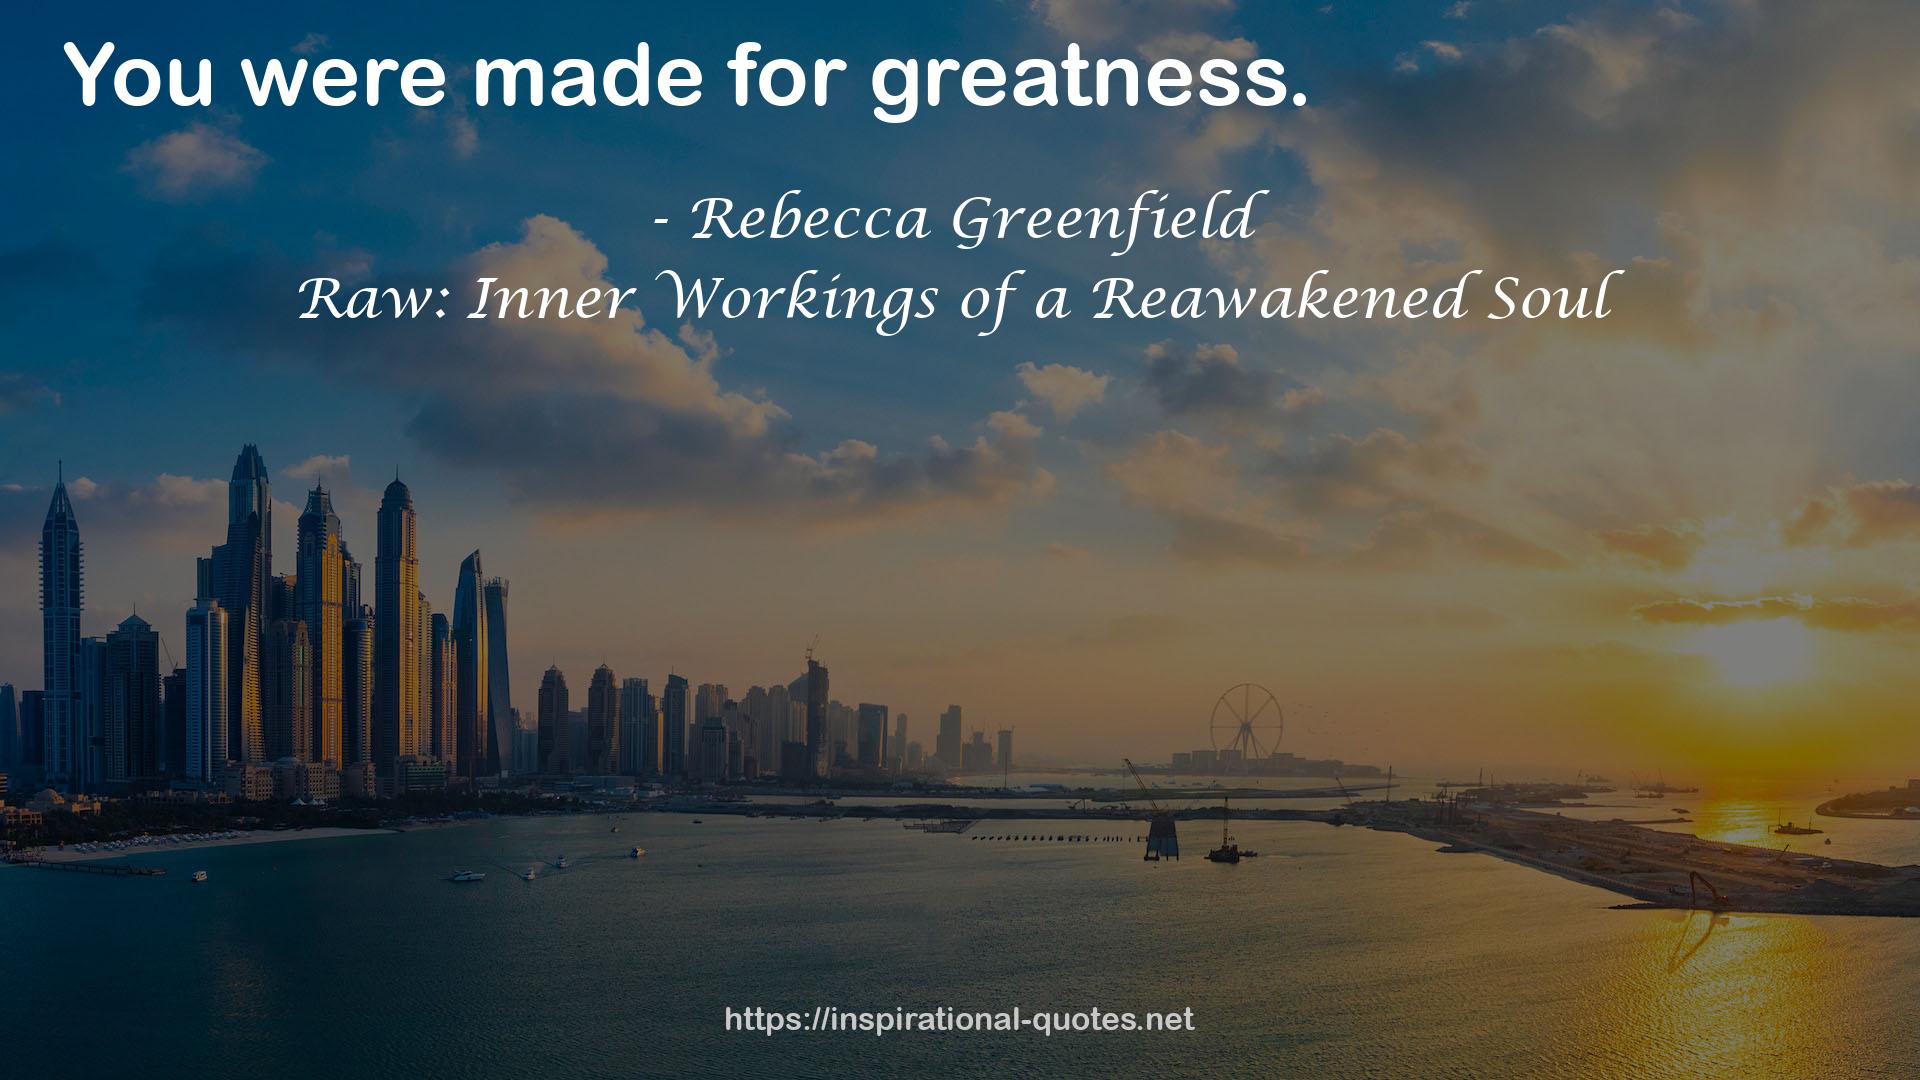 Rebecca Greenfield QUOTES